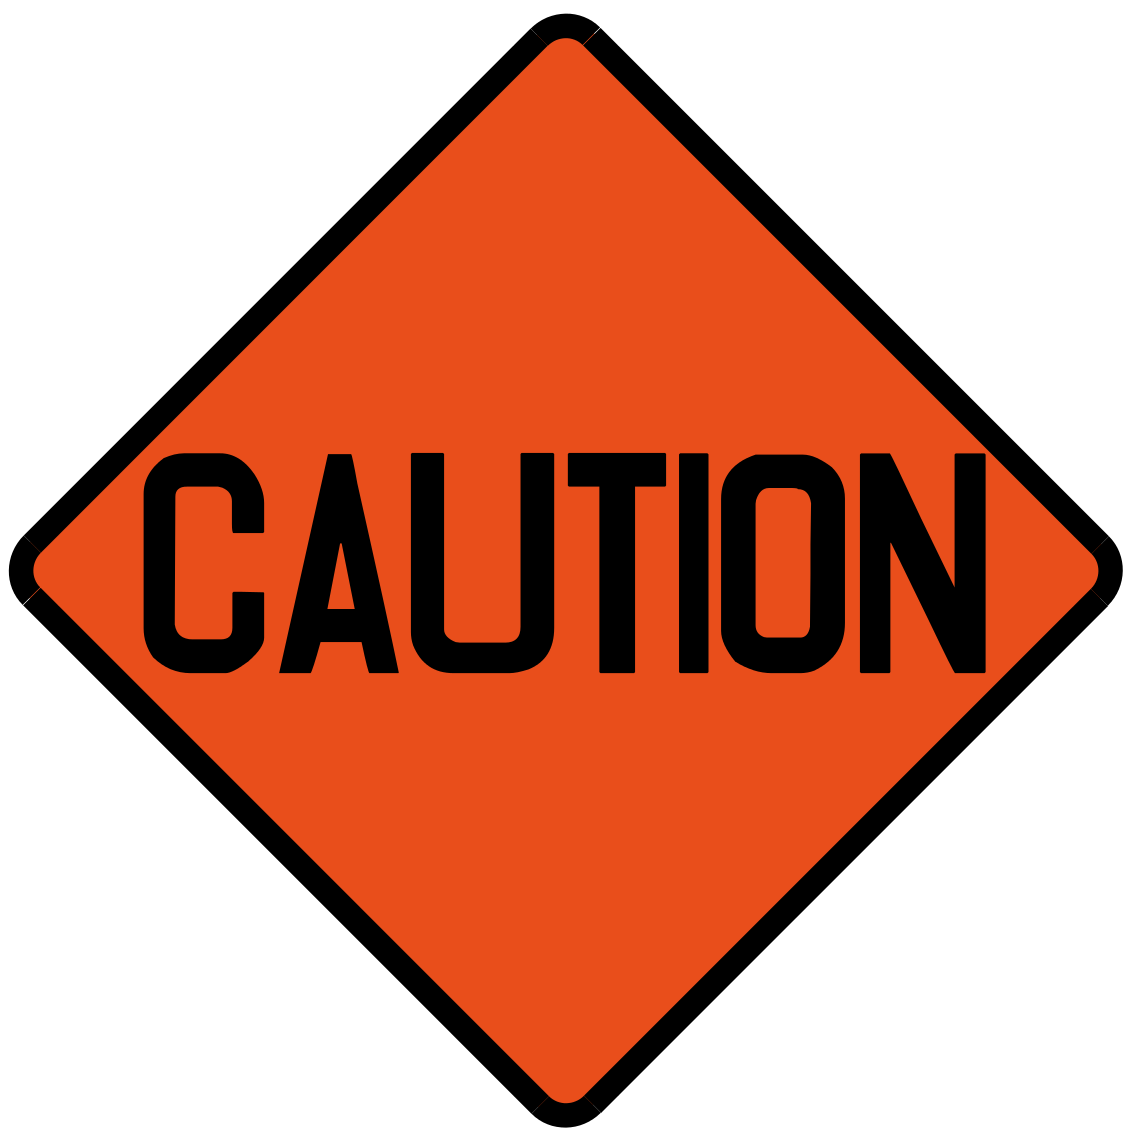 Indication of road stretch affected by road works